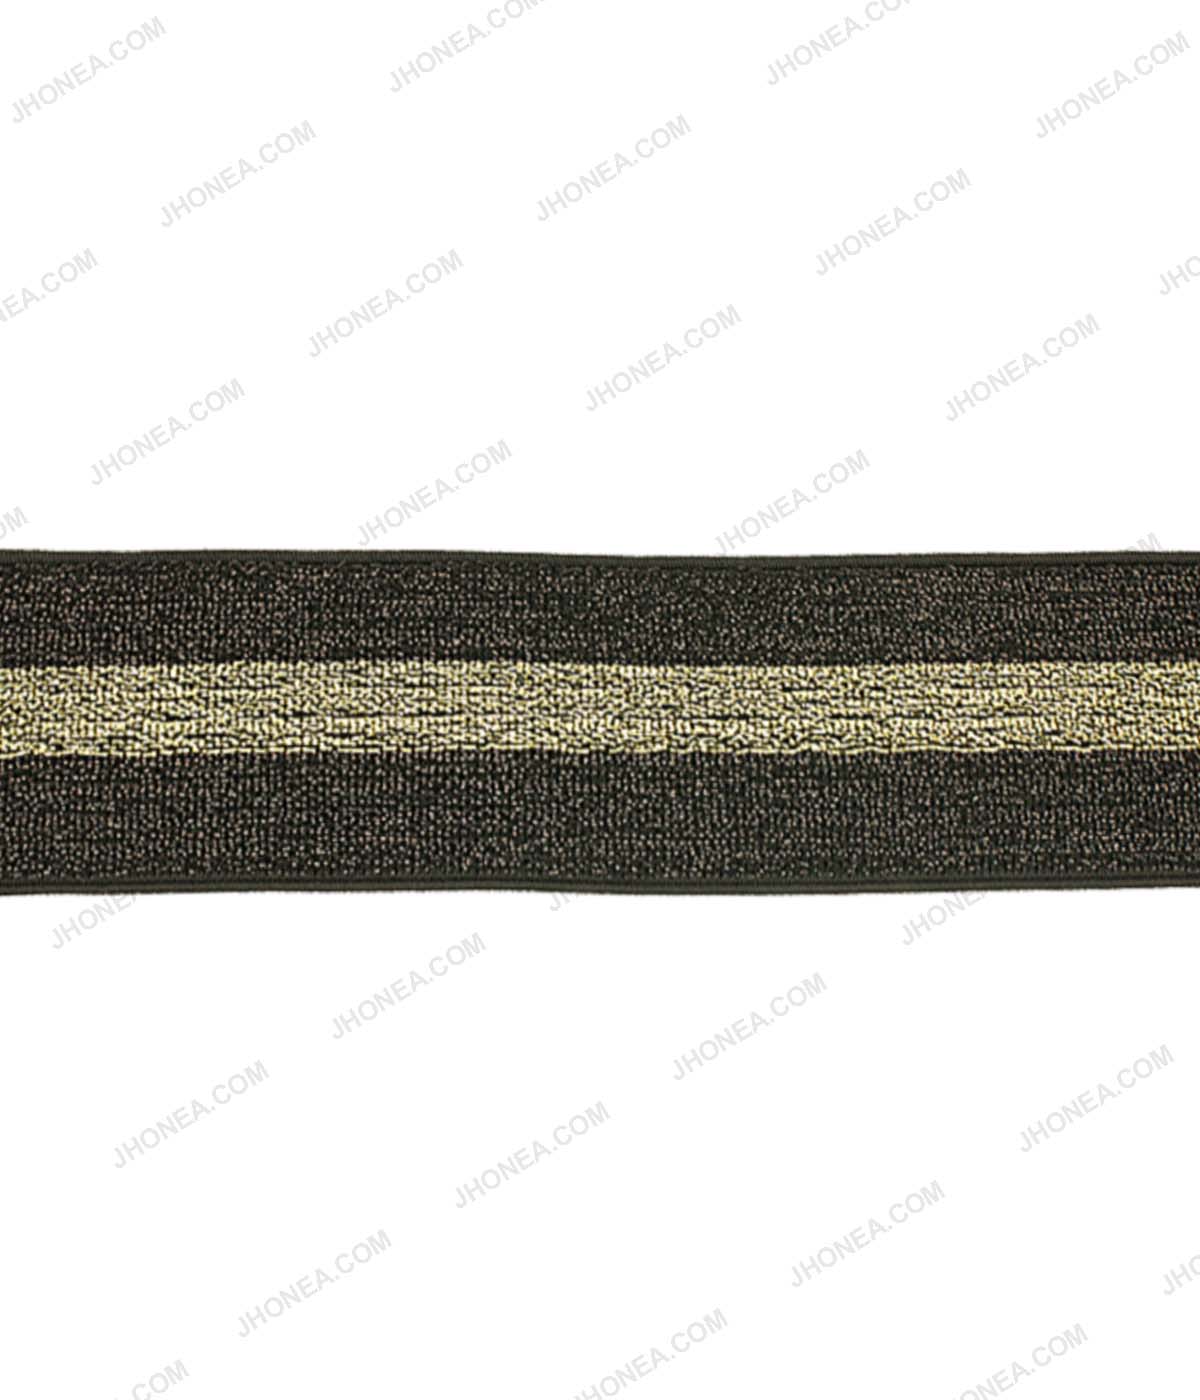 Shiny Metallic 1.5inch wide Fancy Lurex Knit Elastic for Party Wear in Black with Gold Color 